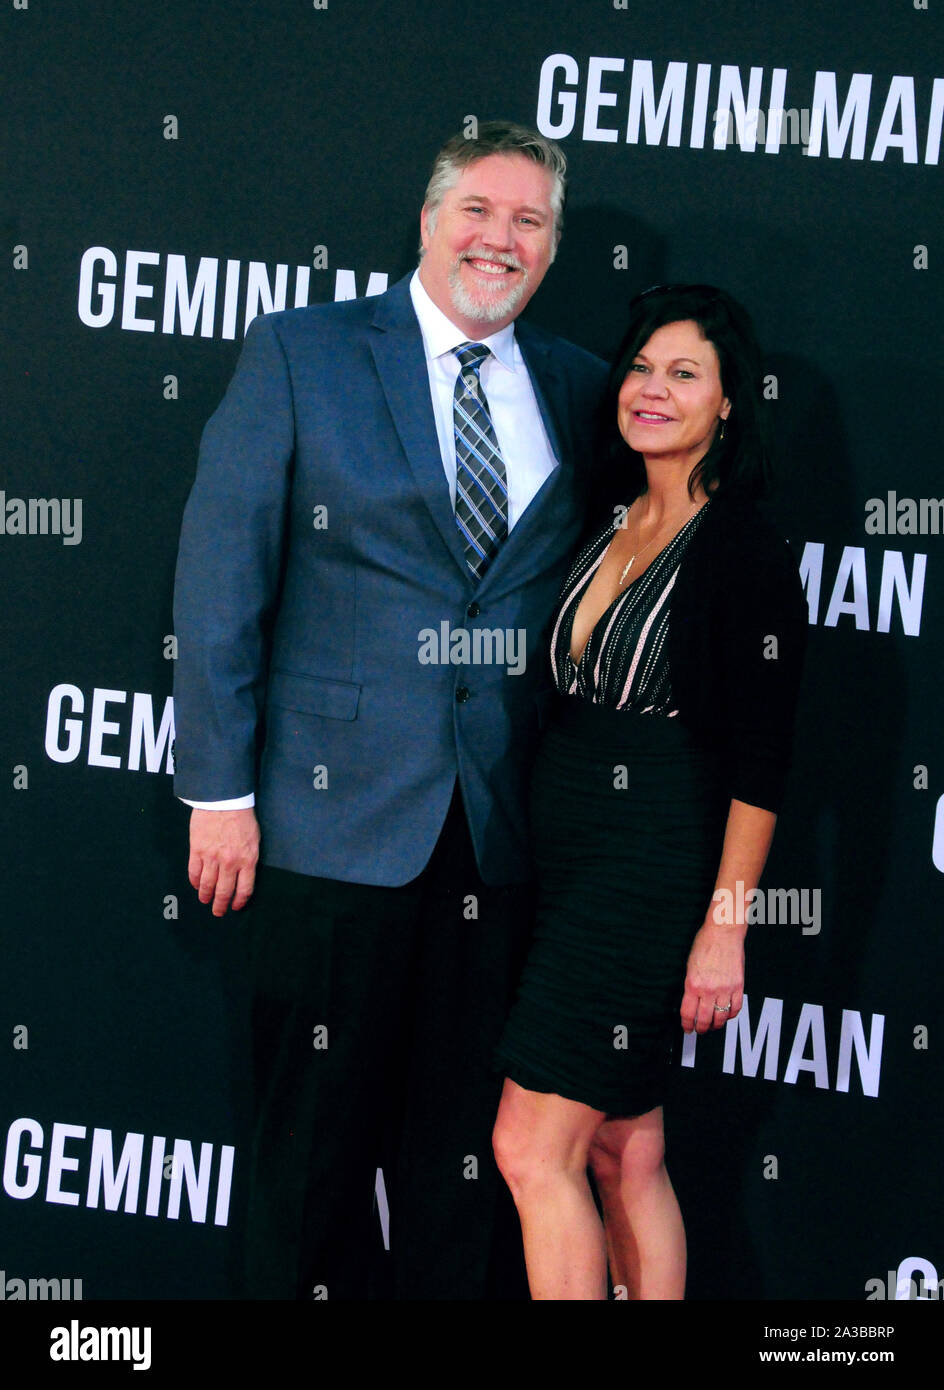 Hollywood, California, USA 6th October 2019 VFX Supervisor Bill Westenhofer attends Paramount Pictures Presents The Premiere of 'Gemini Man' on October 6, 2019 at TCL Chinese Theatre in Hollywood, California, USA. Photo by Barry King/Alamy Live News Stock Photo